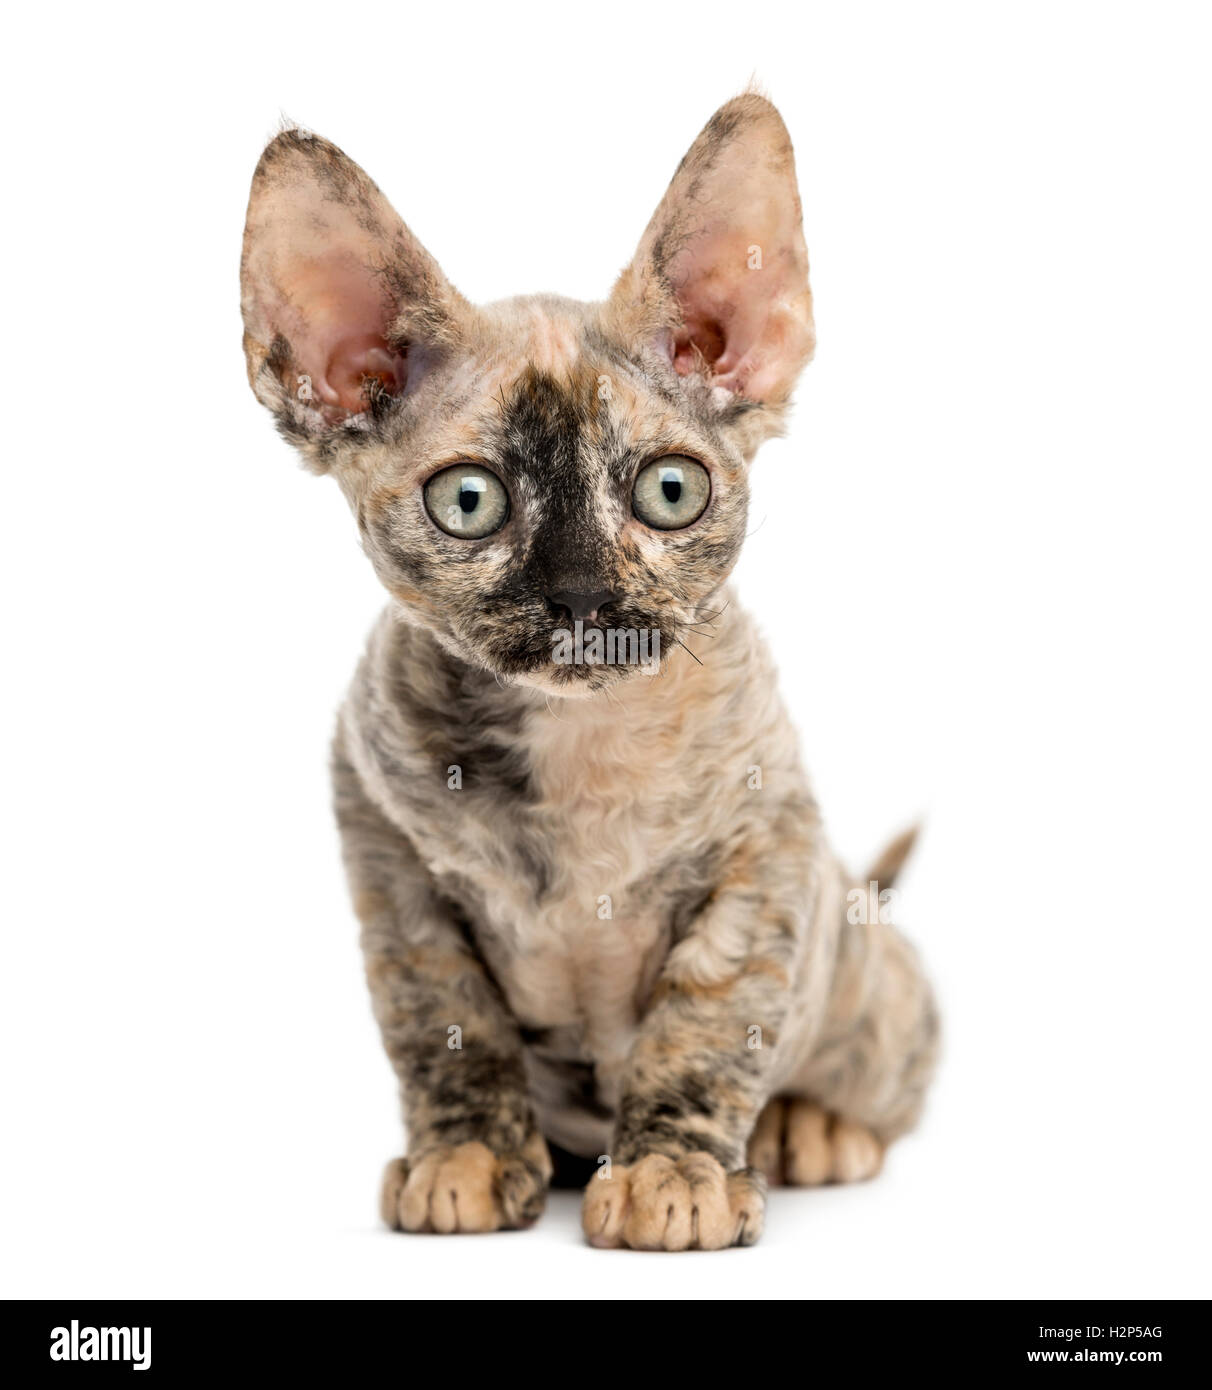 Devon Rex cat sitting isolated on white Banque D'Images